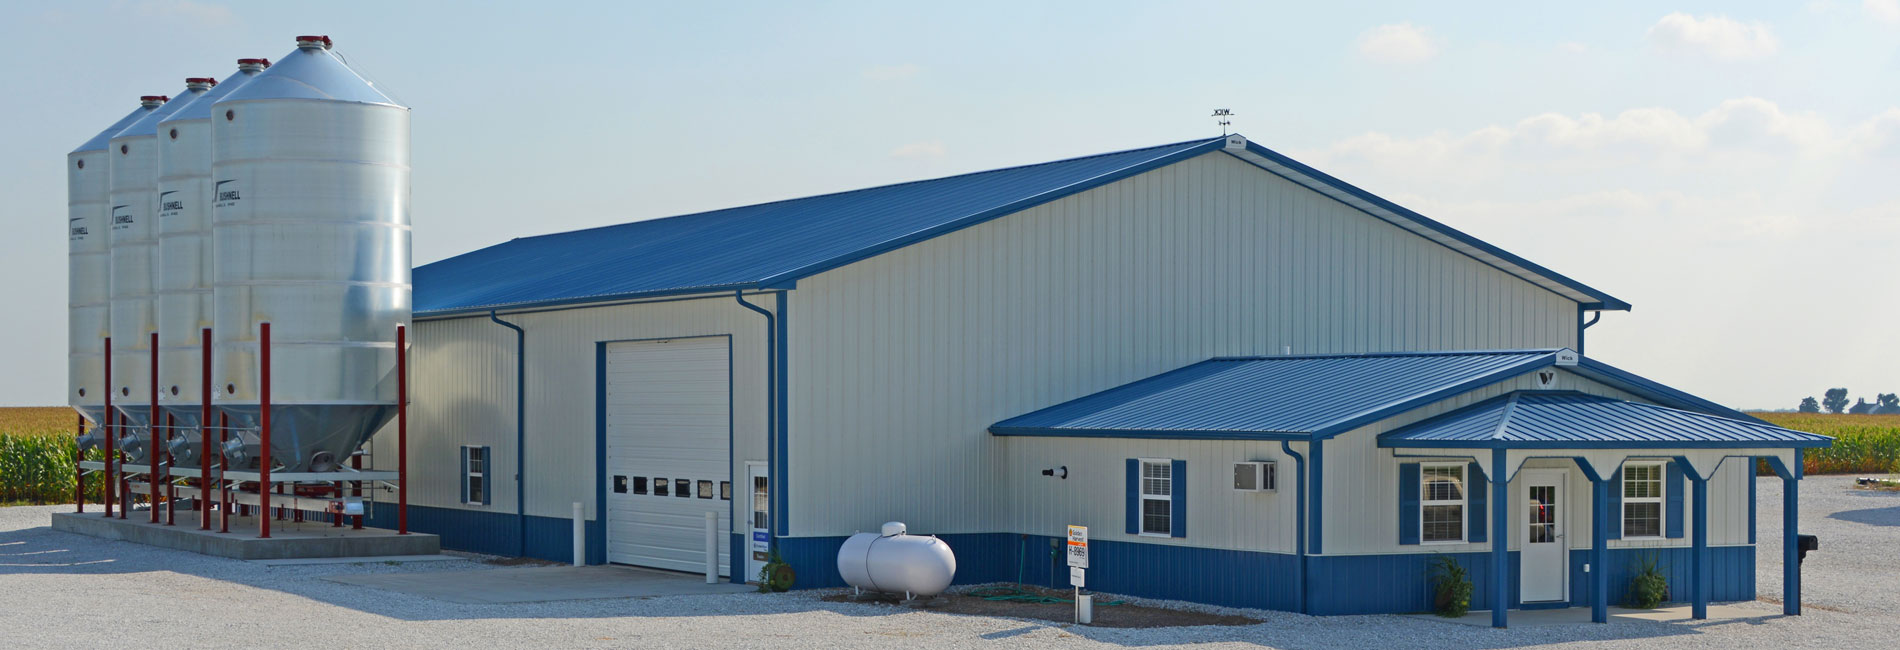 white and blue agricultural building